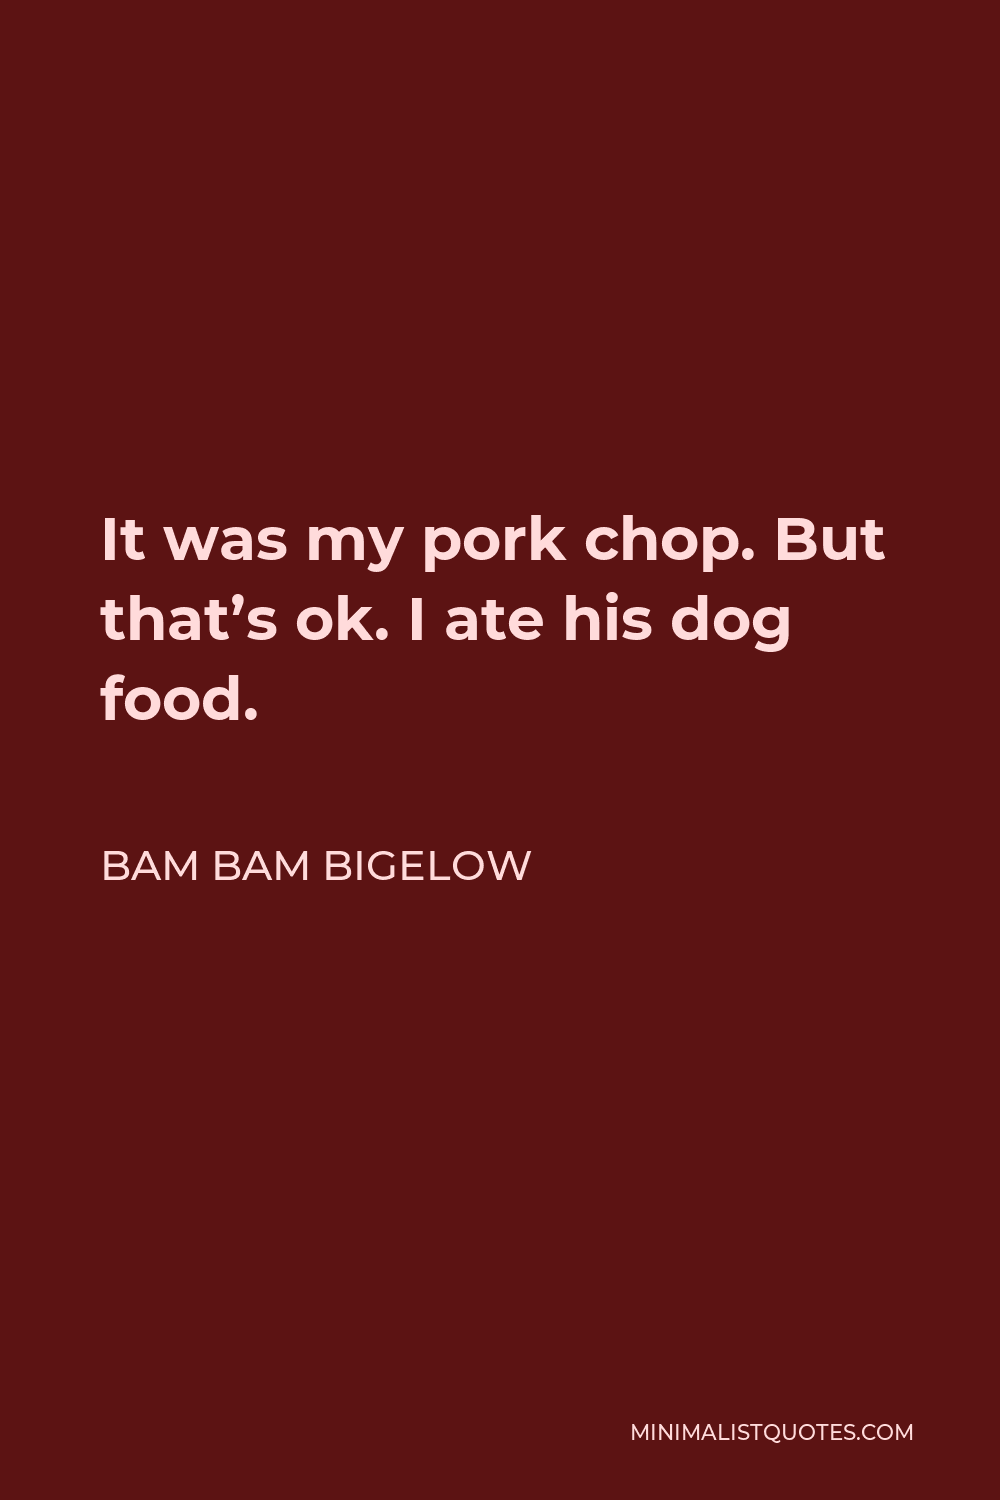 Bam Bam Bigelow Quote - It was my pork chop. But that’s ok. I ate his dog food.